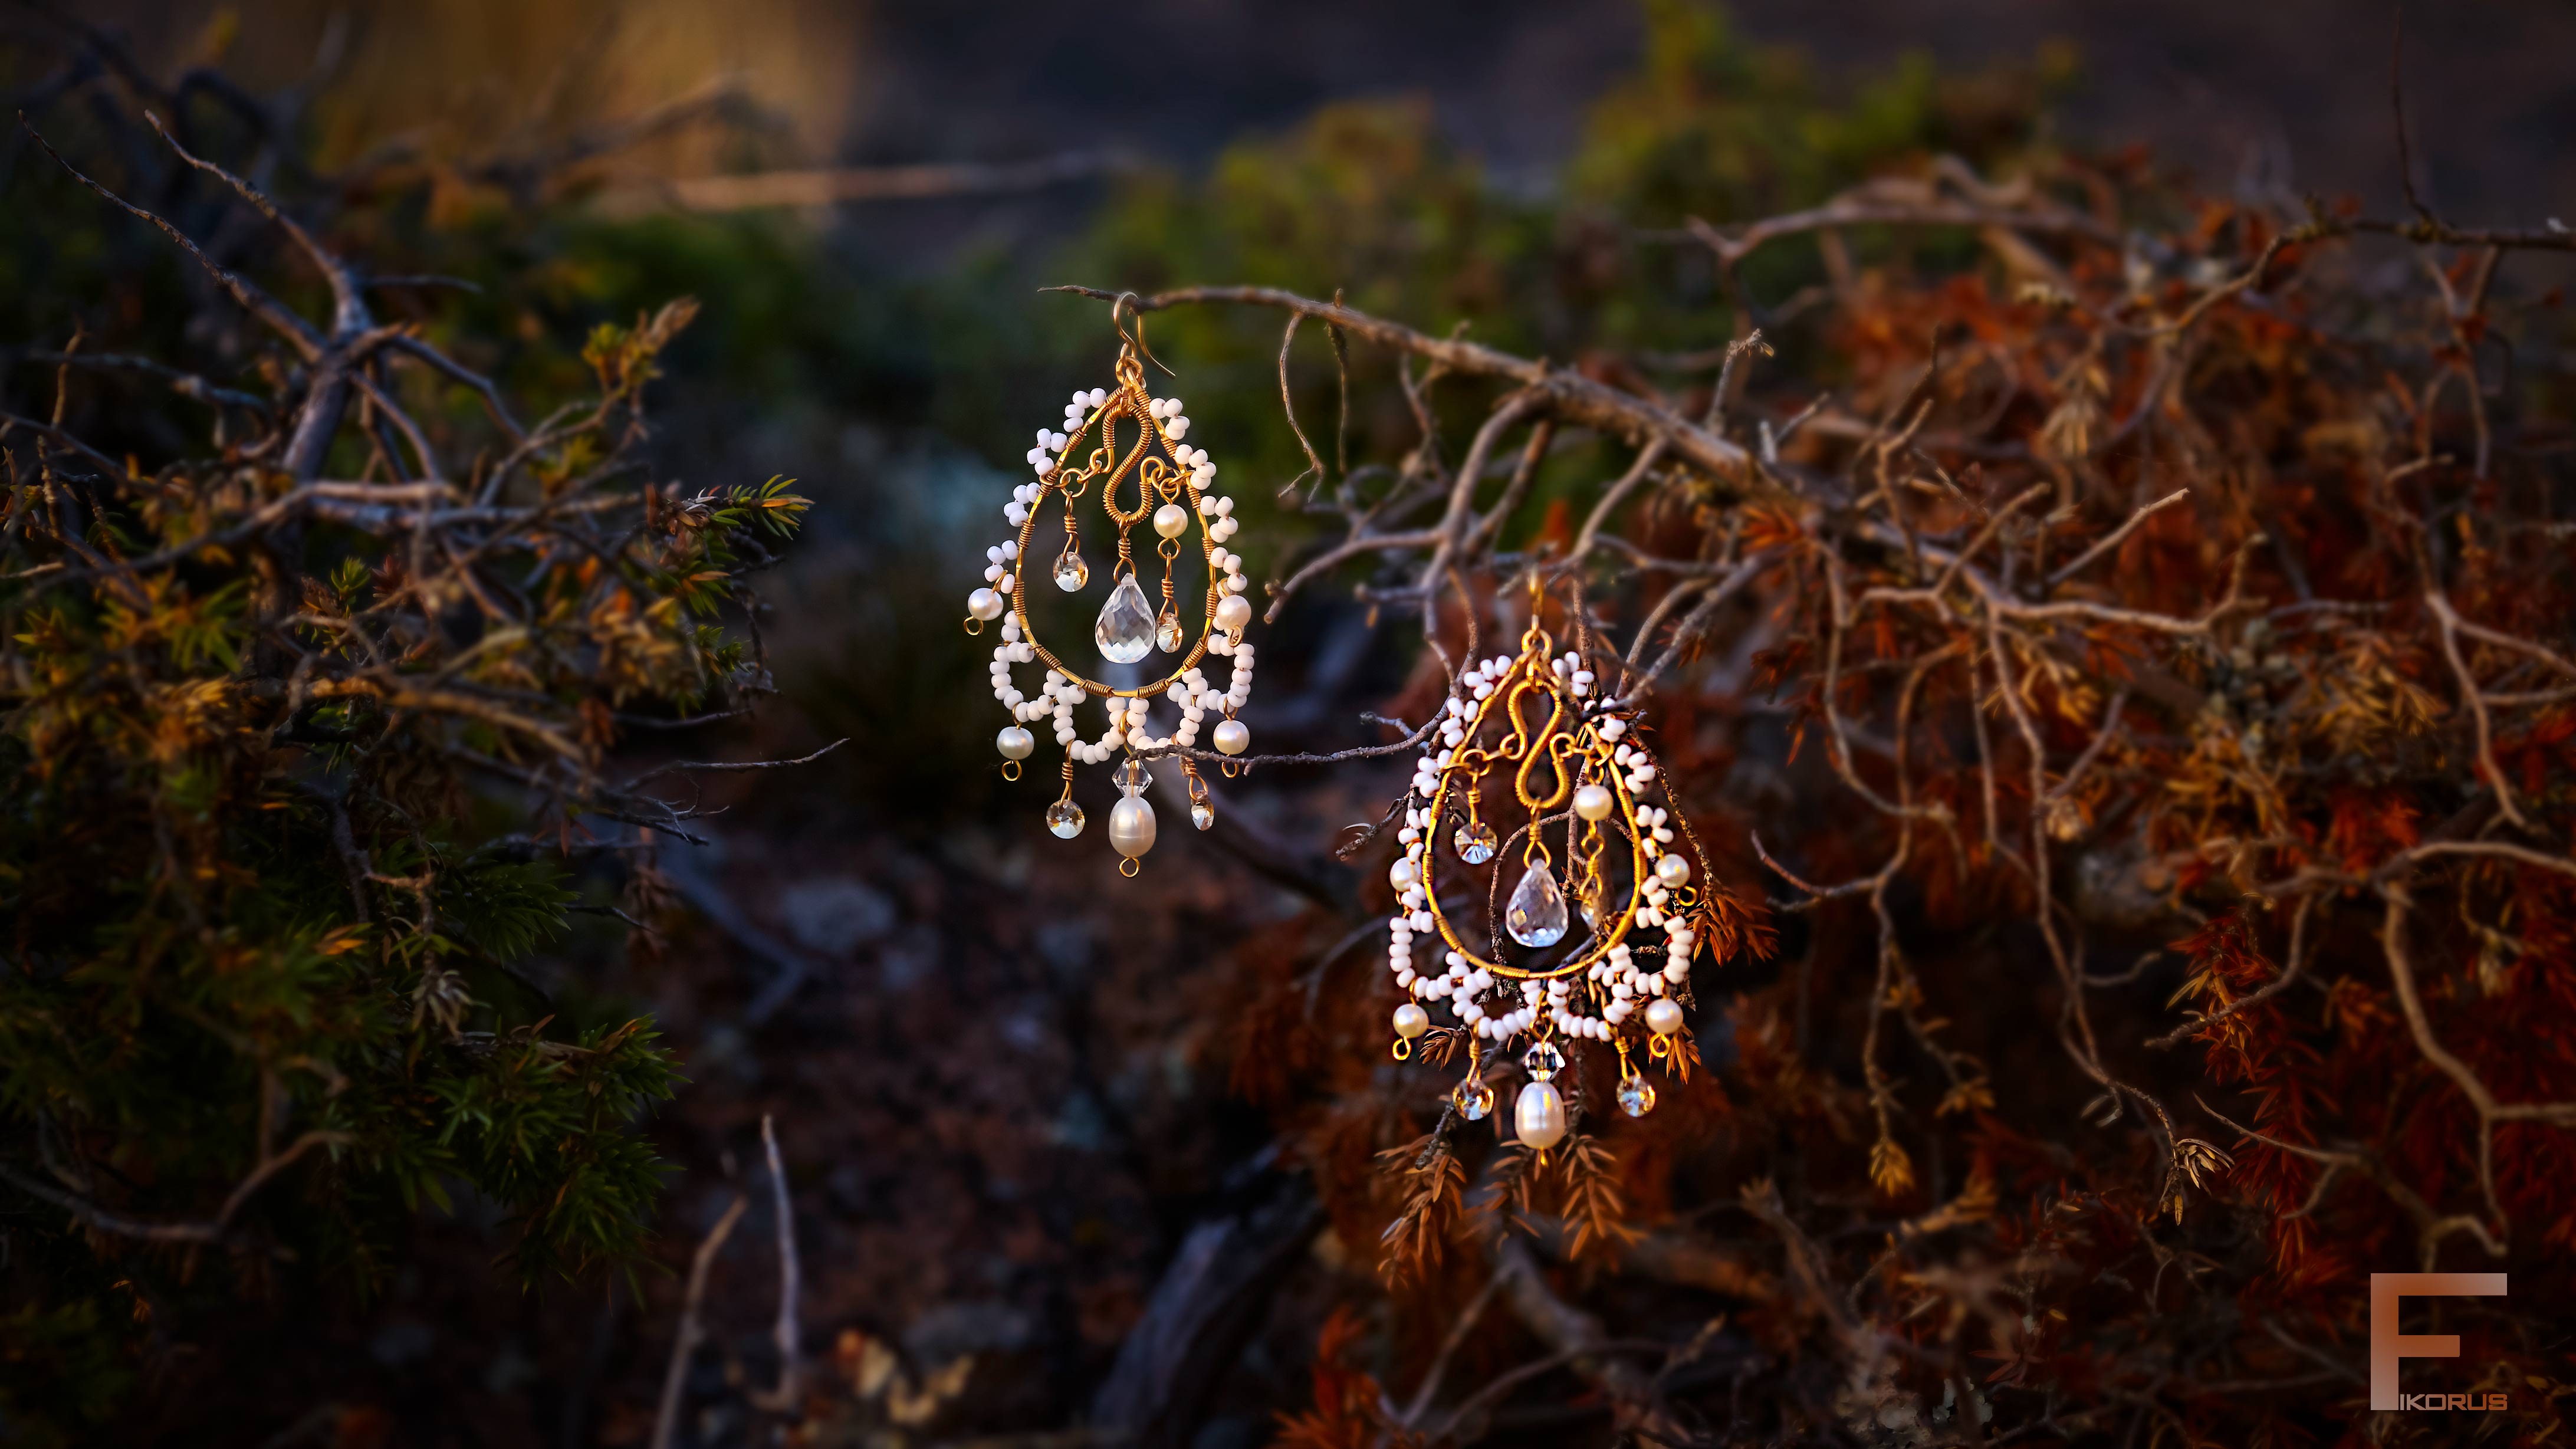 Fikorus brings romance to your relationship. Niina Karlsson created these earrings fit for your queen. 